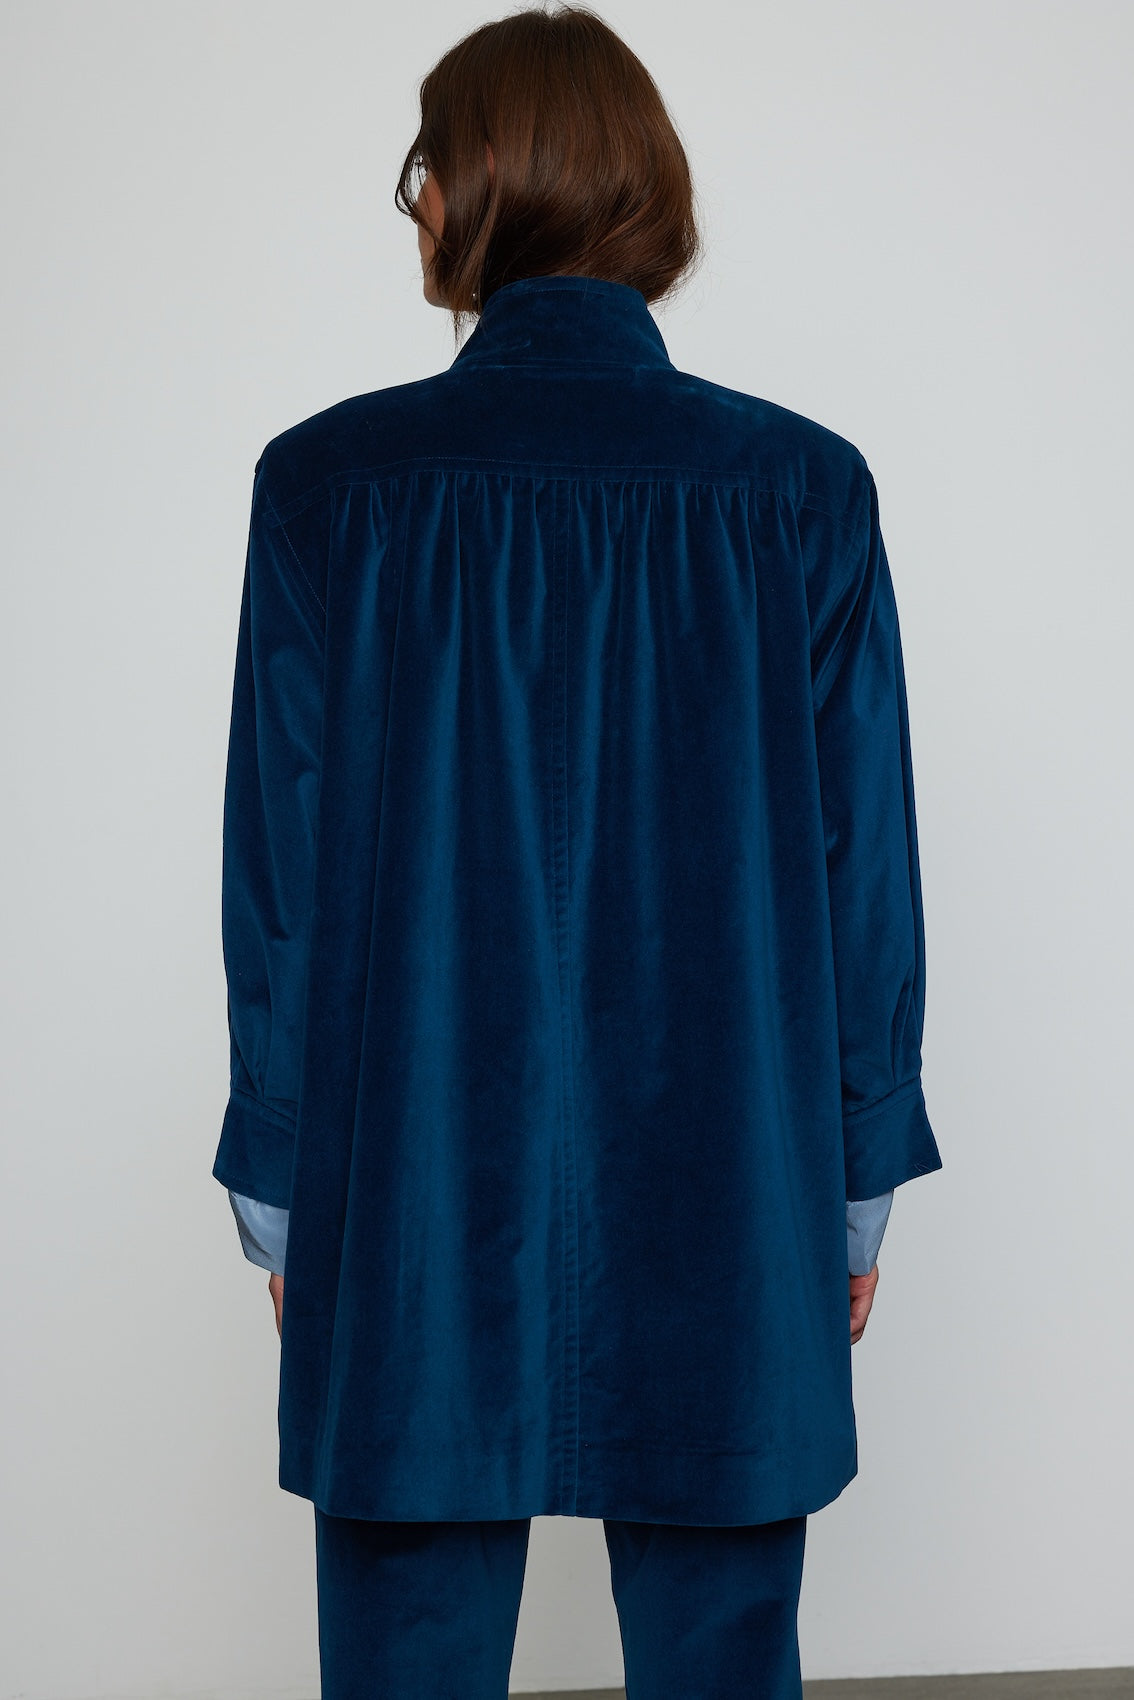 Caro Editions Gaia Coat is a new Caro Editions style made in a rich blue cotton velvet. The coat is loose fitting, long, square wide shoulders with a light shoulder pad and horn buttons. Wear it open or closed over your outfit, or match it with Annika Pants in Brown cotton velvet to create a statement suit, or style casually with jeans.